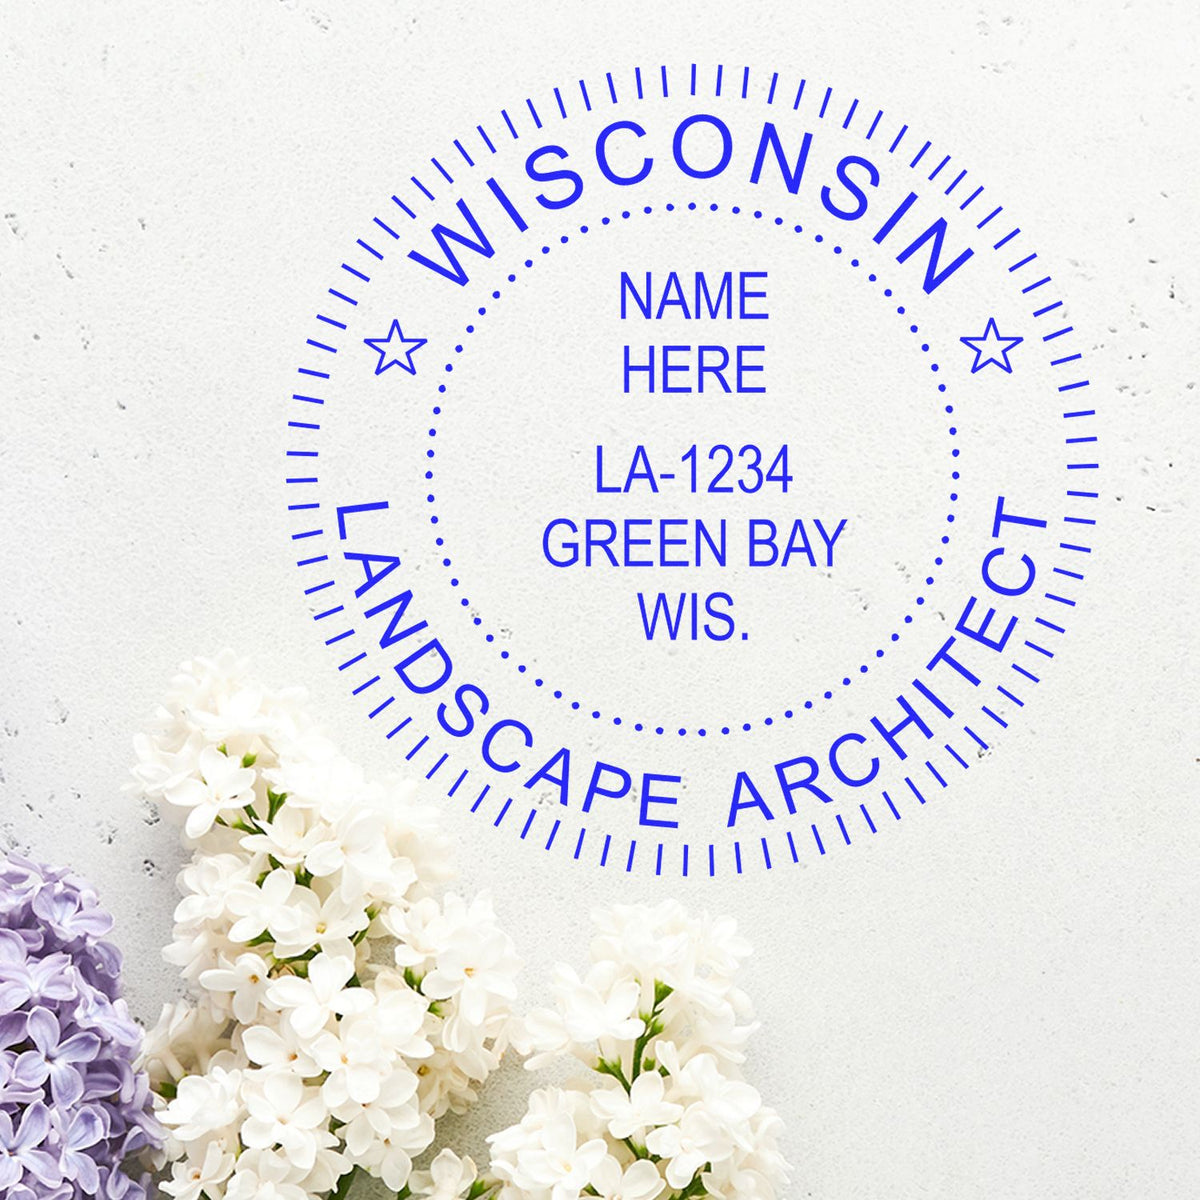 The Digital Wisconsin Landscape Architect Stamp stamp impression comes to life with a crisp, detailed photo on paper - showcasing true professional quality.